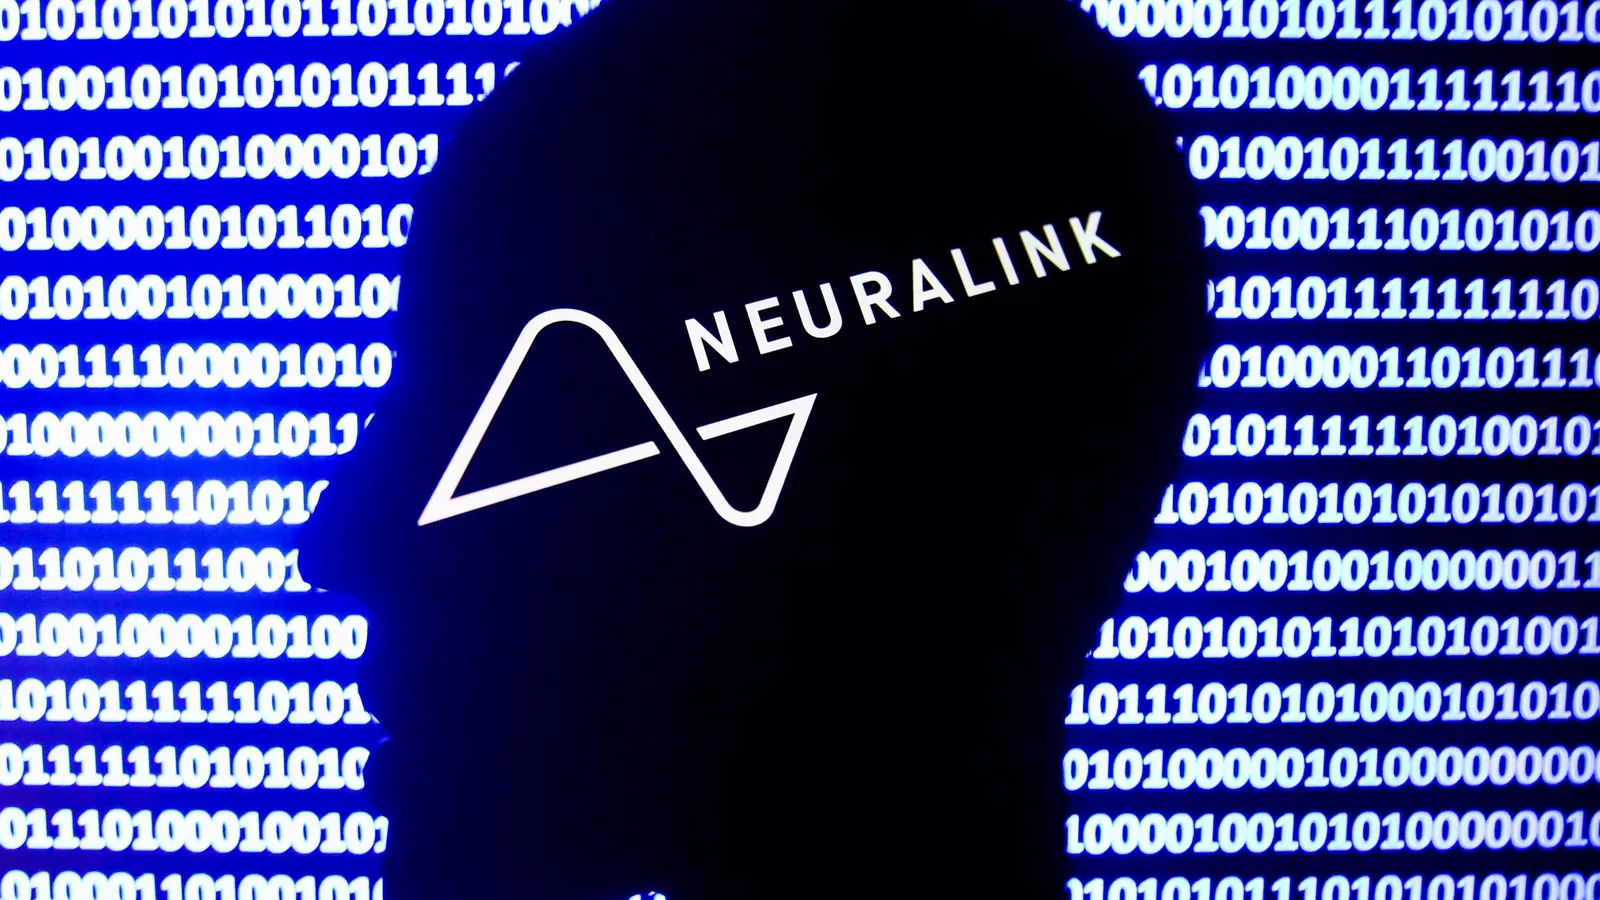 Elon Musk's Latest Venture Hits a Snag: Inside the FDA's Findings on Neuralink's Lab Practices